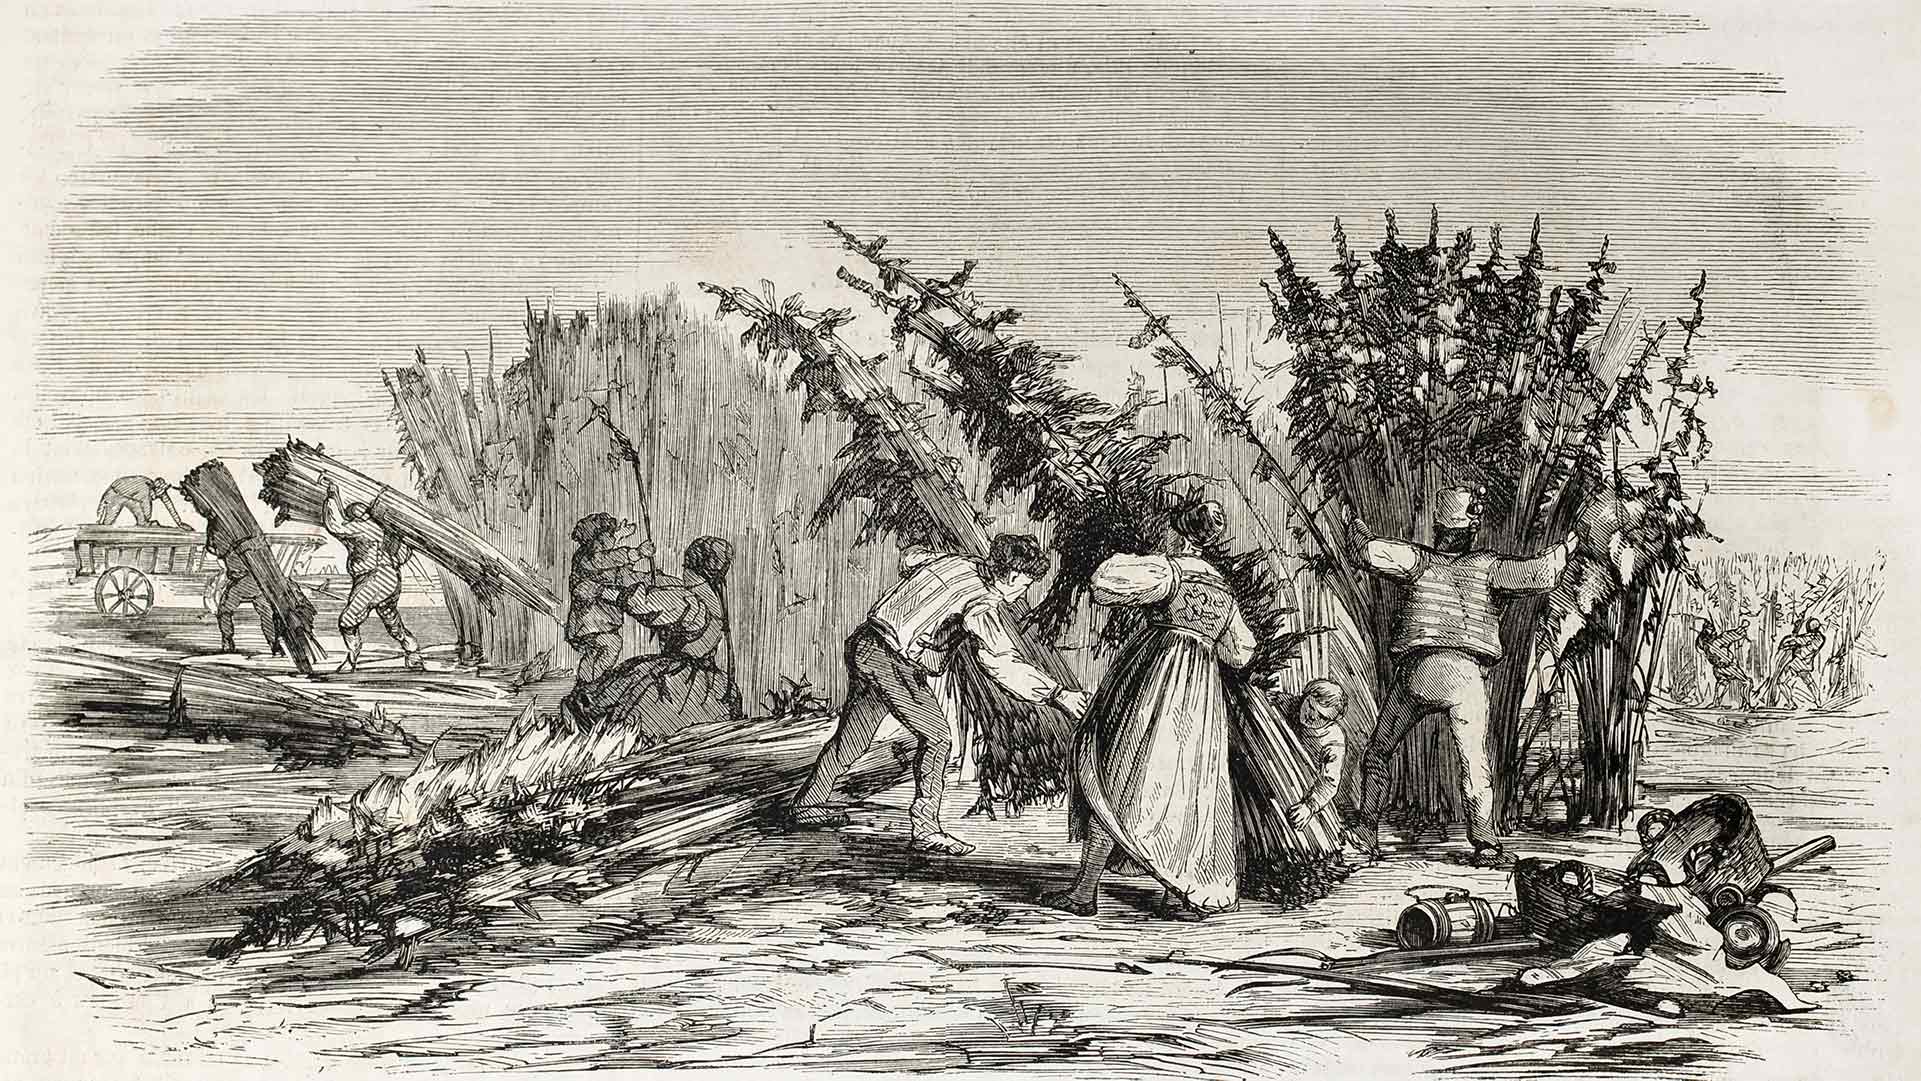 Hemp harvesting on Rhine bank. Created by Lallemand, published on L'Illustration, Journal Universel, Paris, 1860